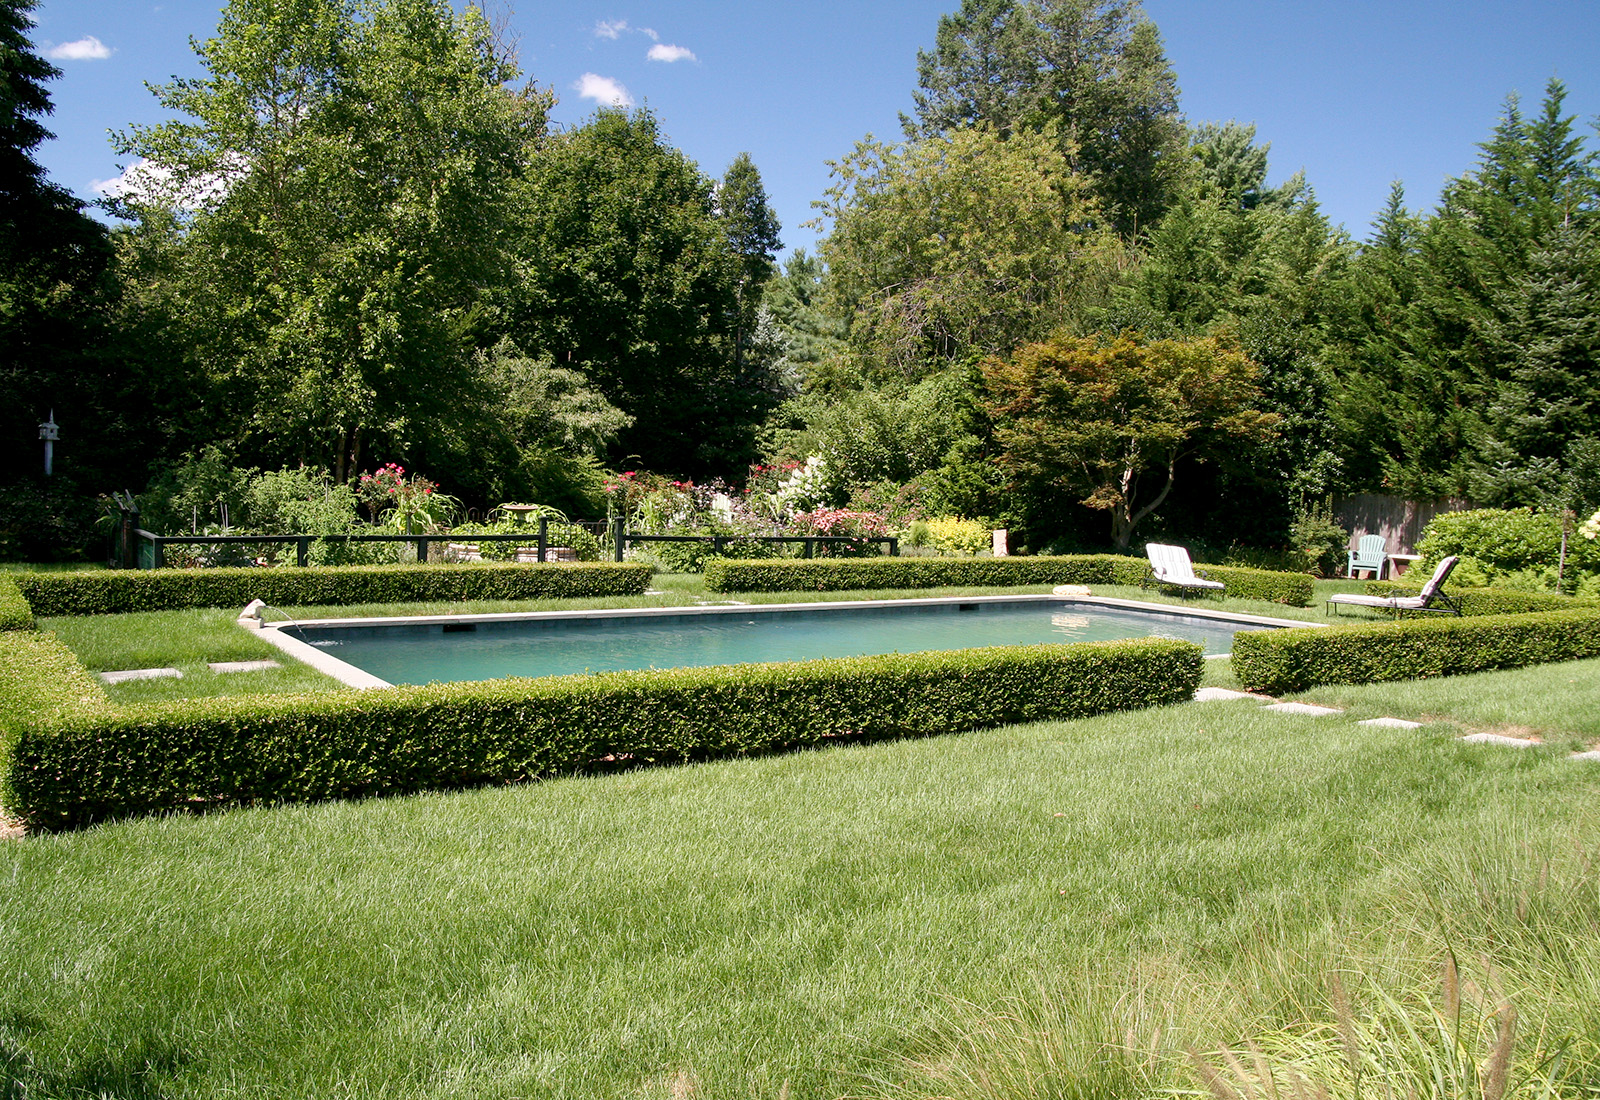 Gunite pool with a bluestone pathway, formal hedge and vegetable garden.